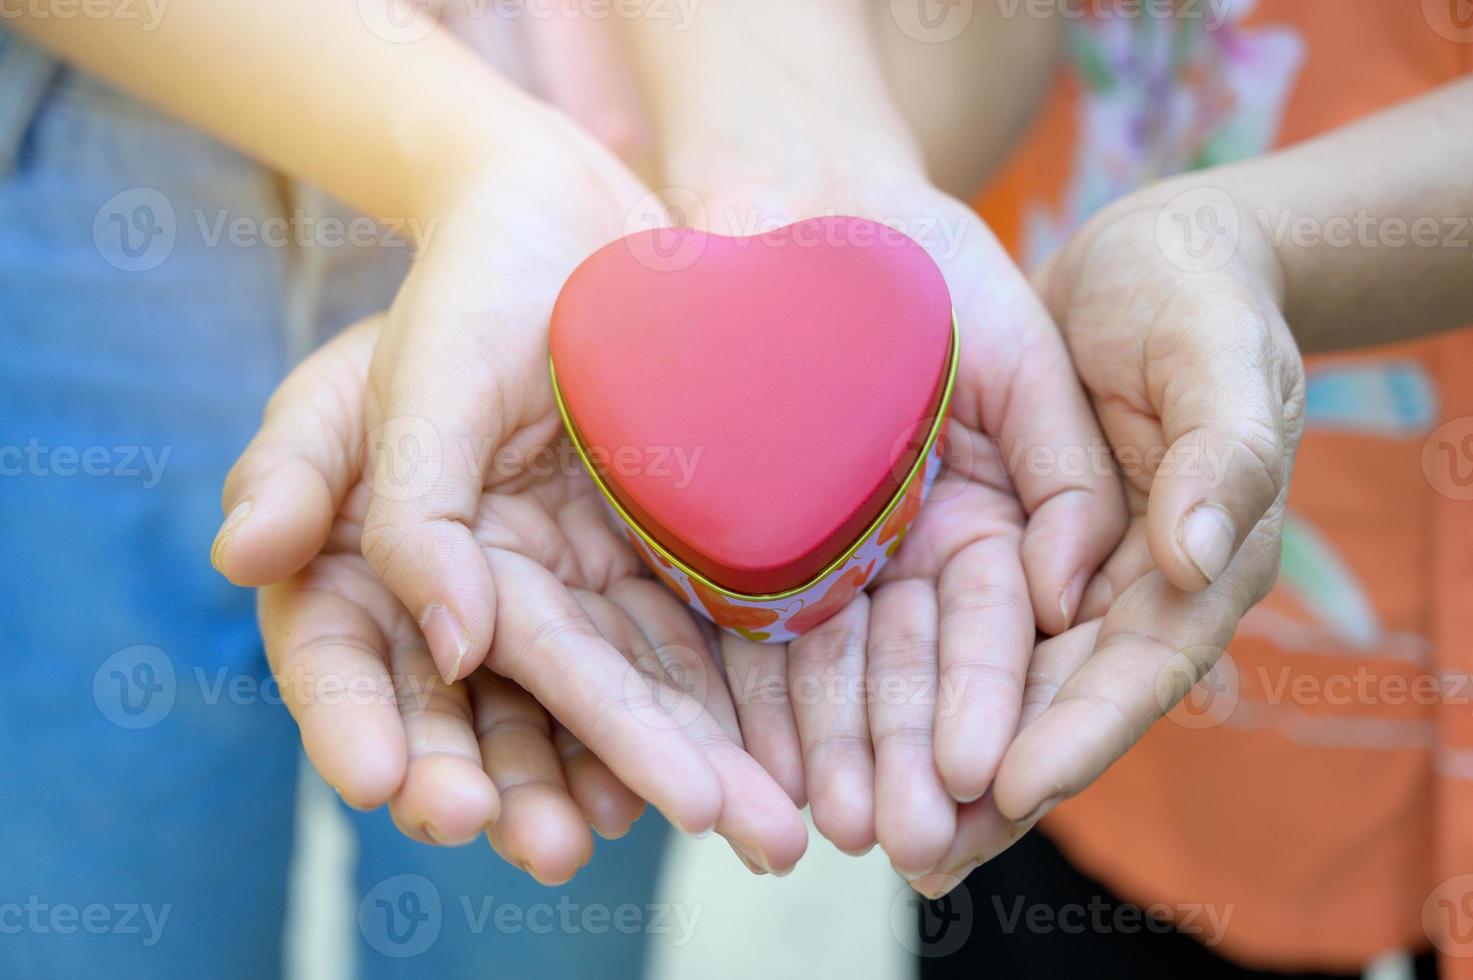 The hands of children and adults in the family have a heart in their hands. photo